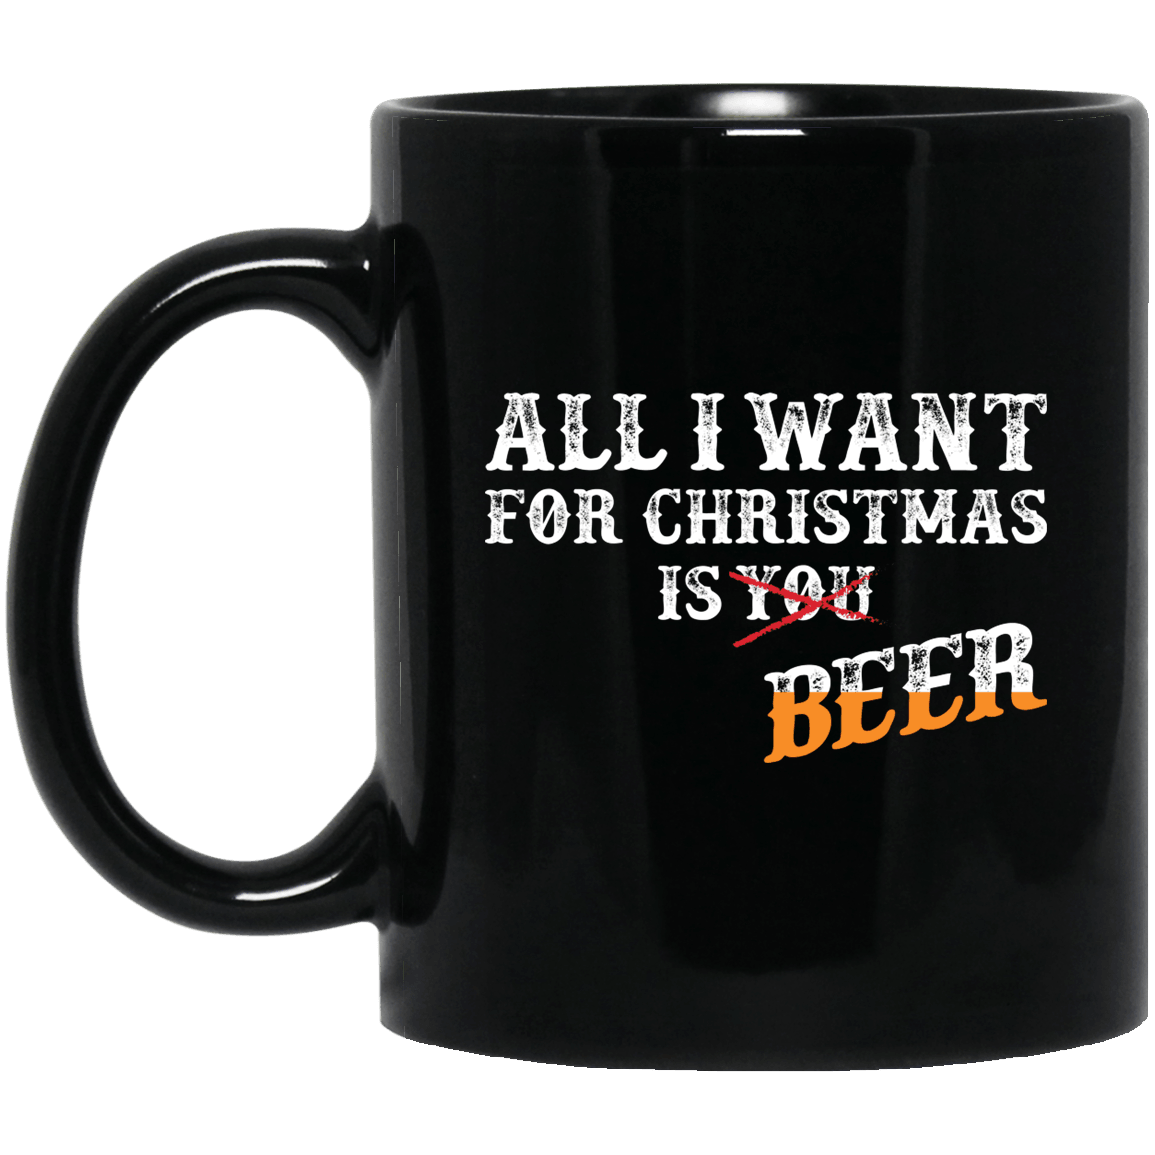 Designs by MyUtopia Shout Out:All I Want For Christmas Is Beer - Ceramic Coffee Mug - Black,Black / 11 oz,Apparel